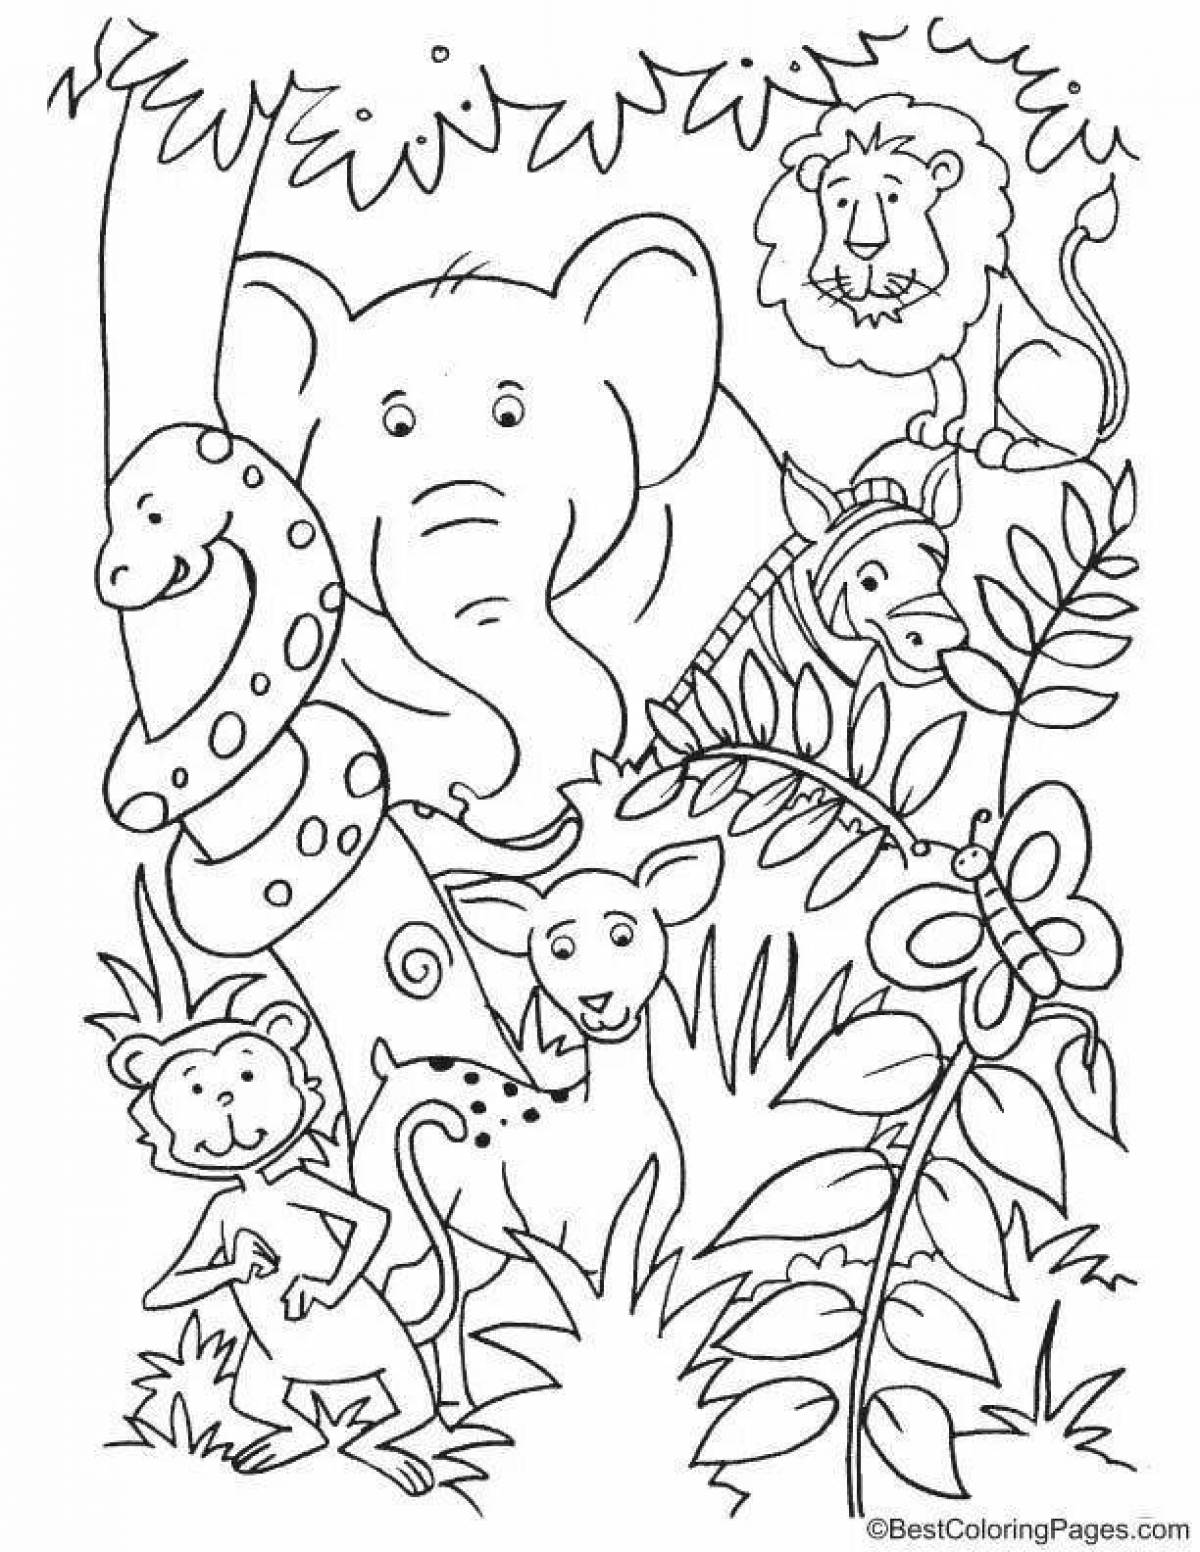 Coloring pages happy jungle animals